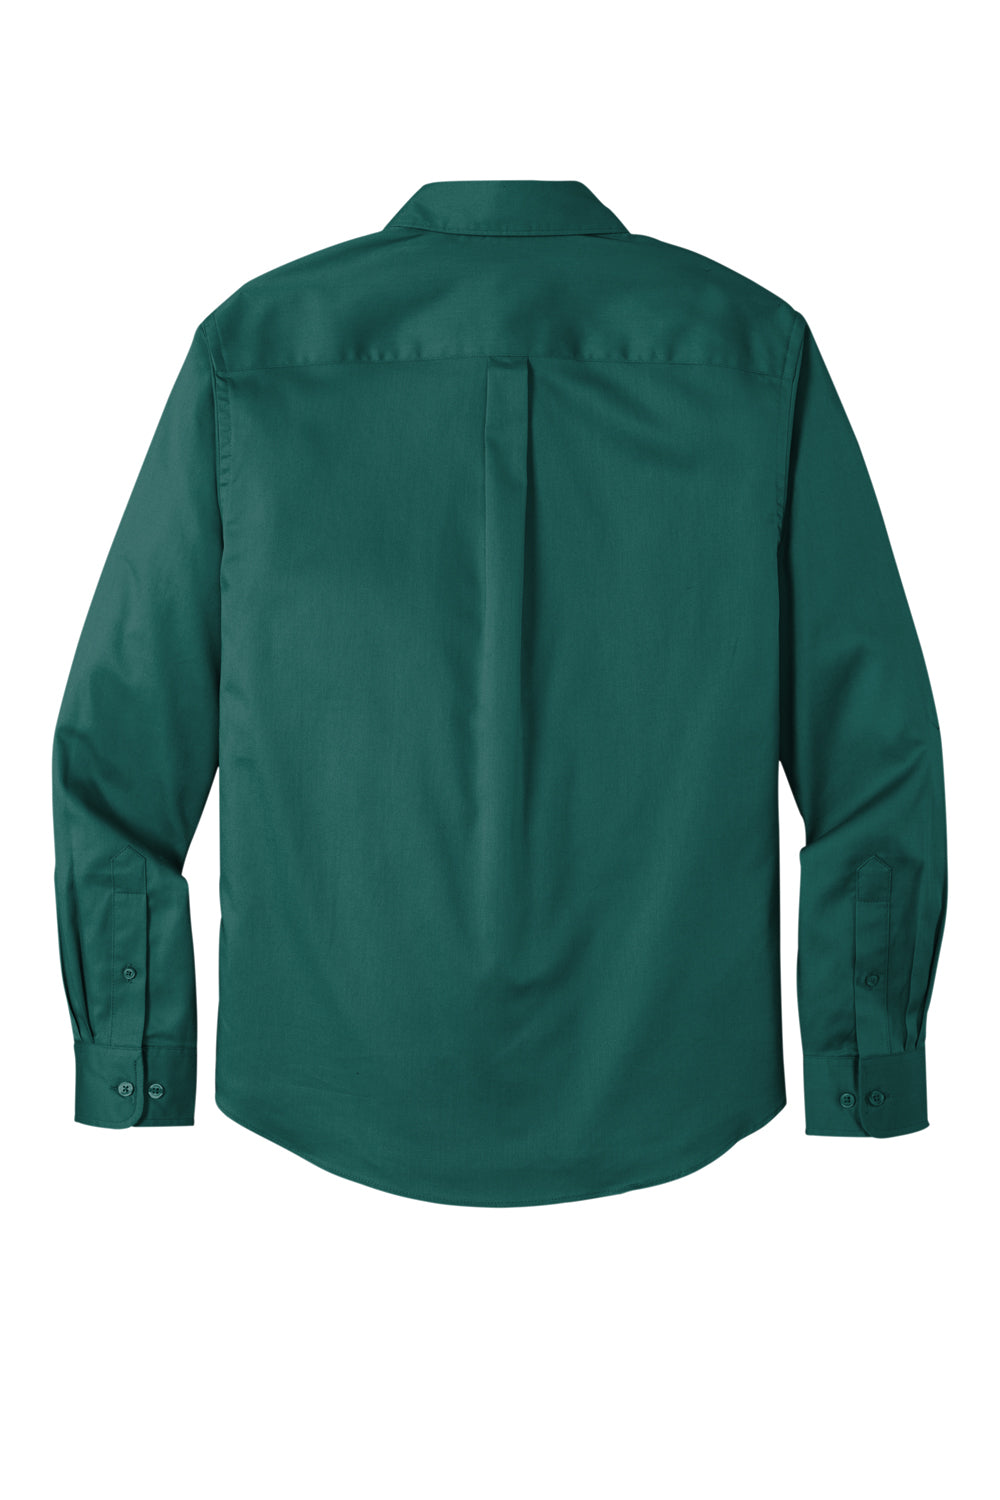 Port Authority W808 SuperPro Wrinkle Resistant React Long Sleeve Button Down Shirt w/ Pocket Marine Green Flat Back